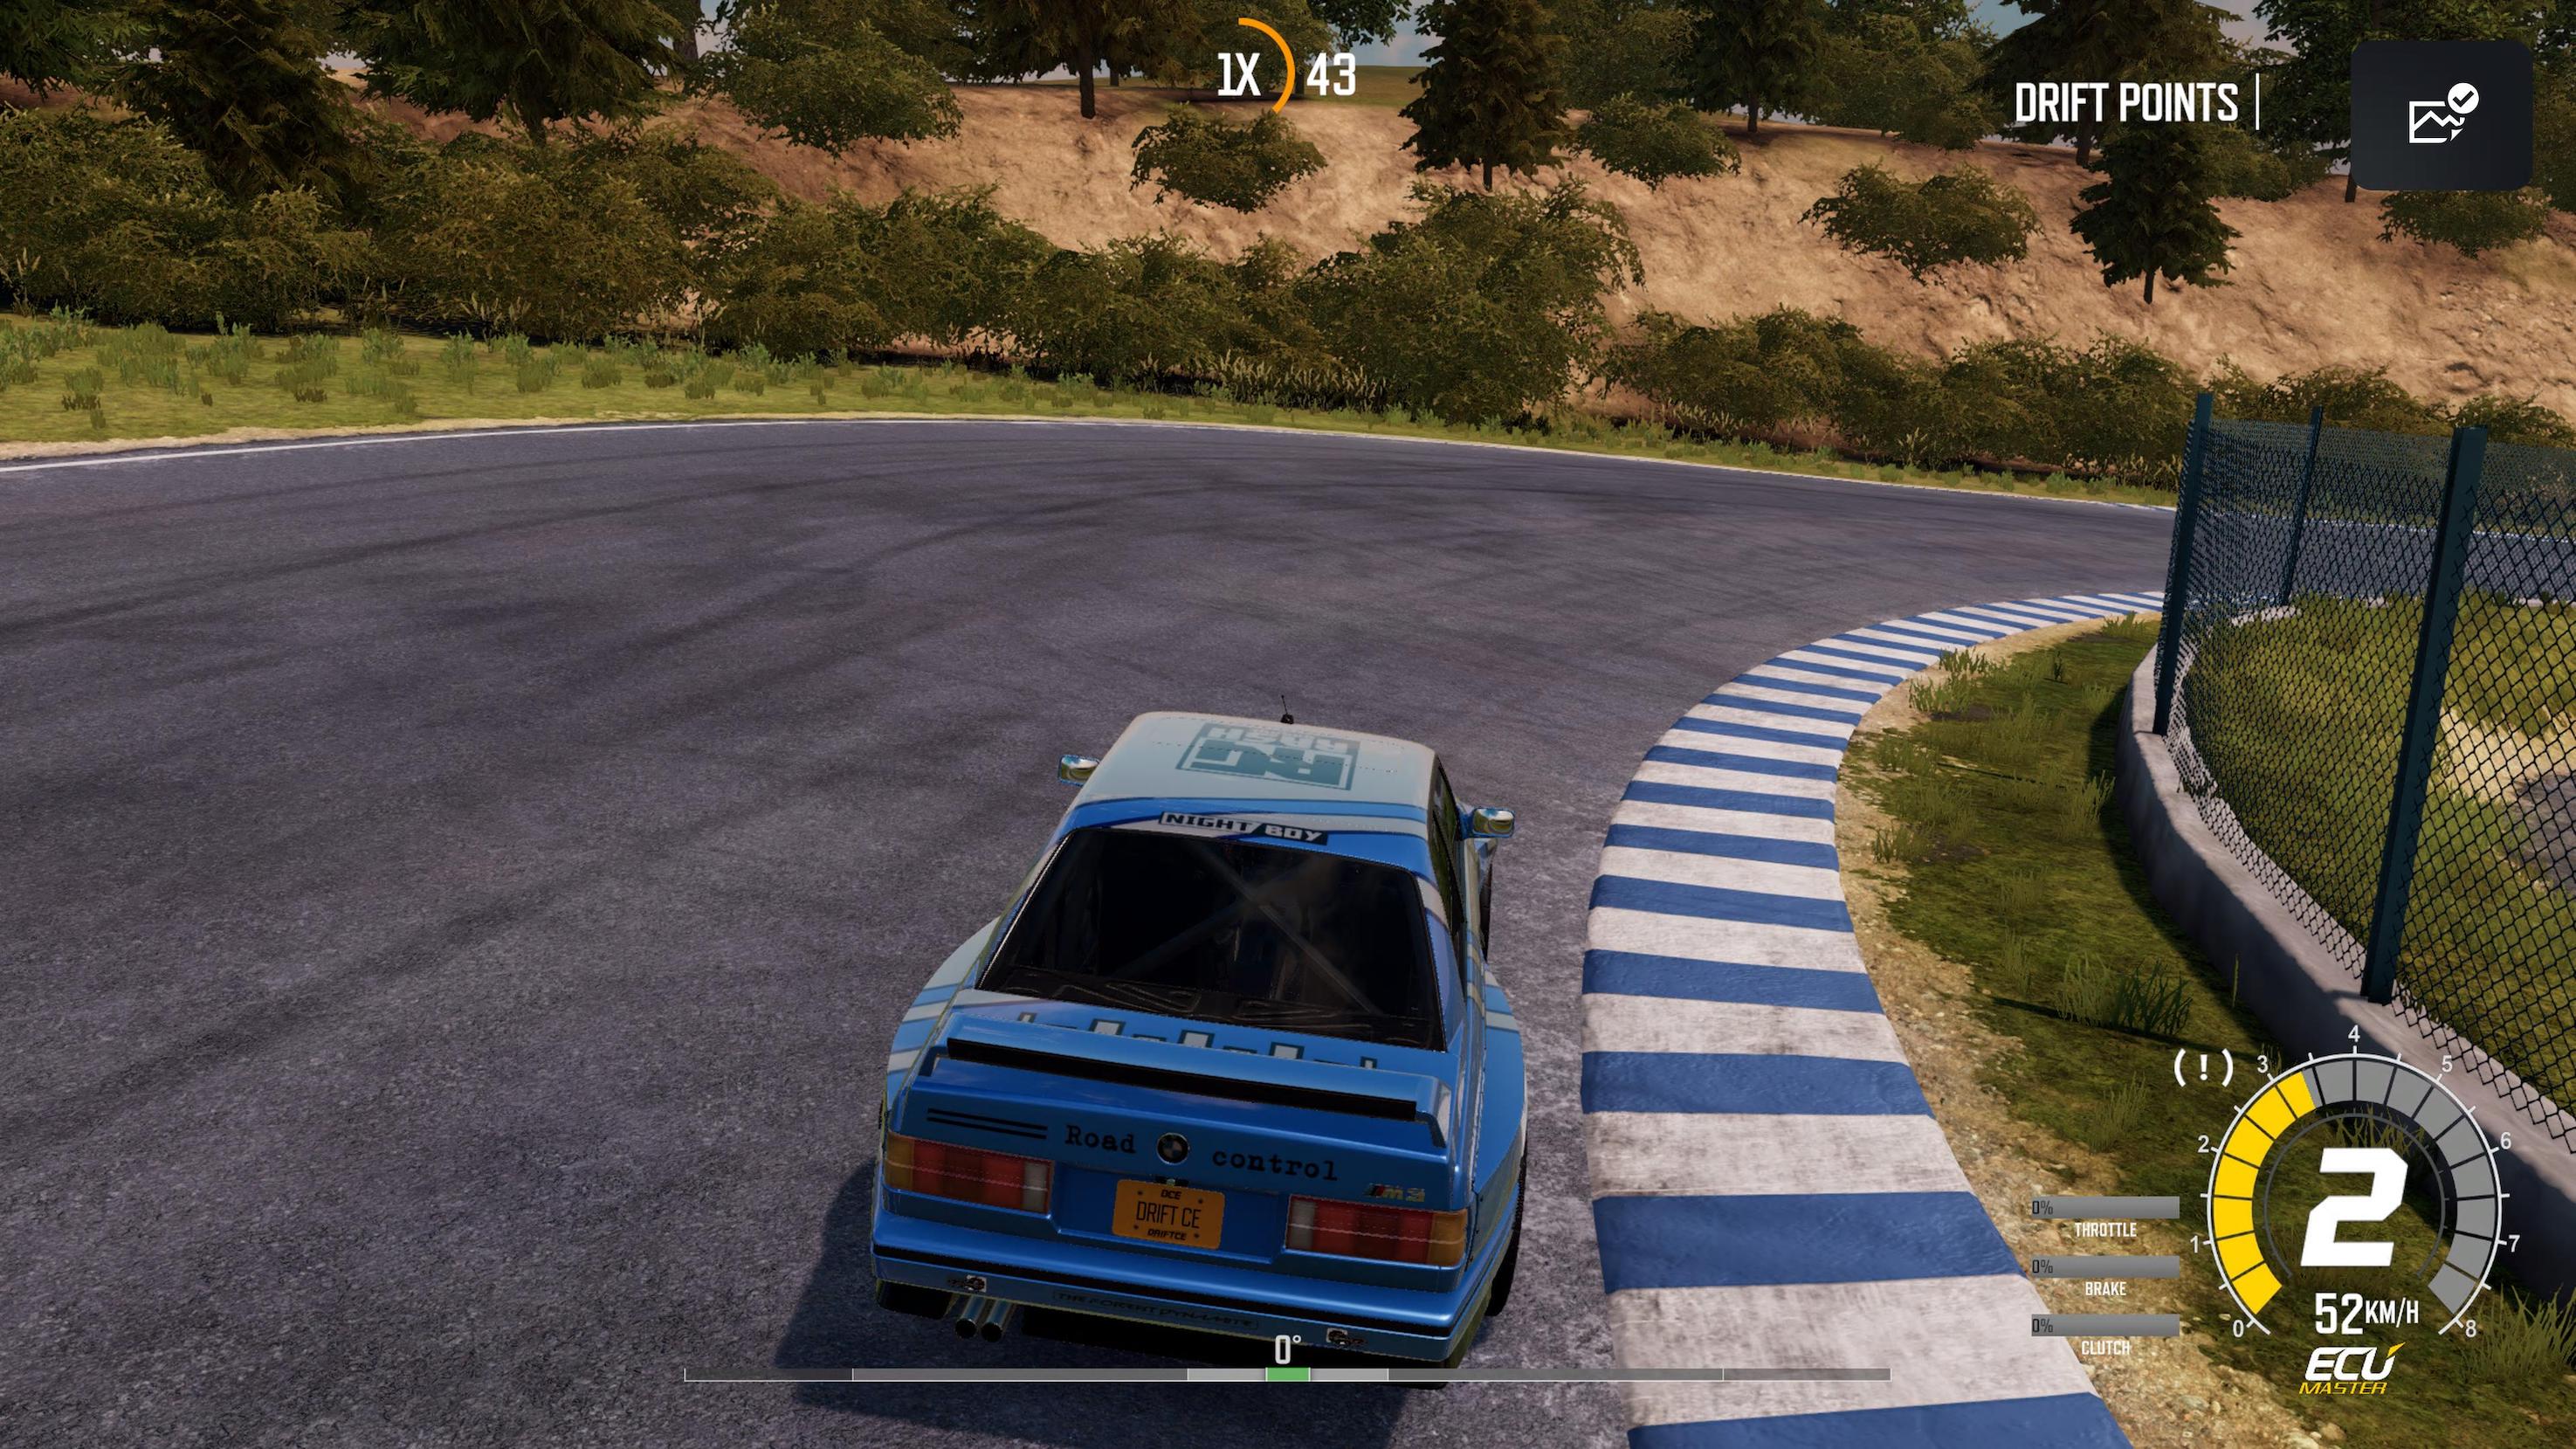 Top 12 Best DRIFT Games For iOS and Android So Far